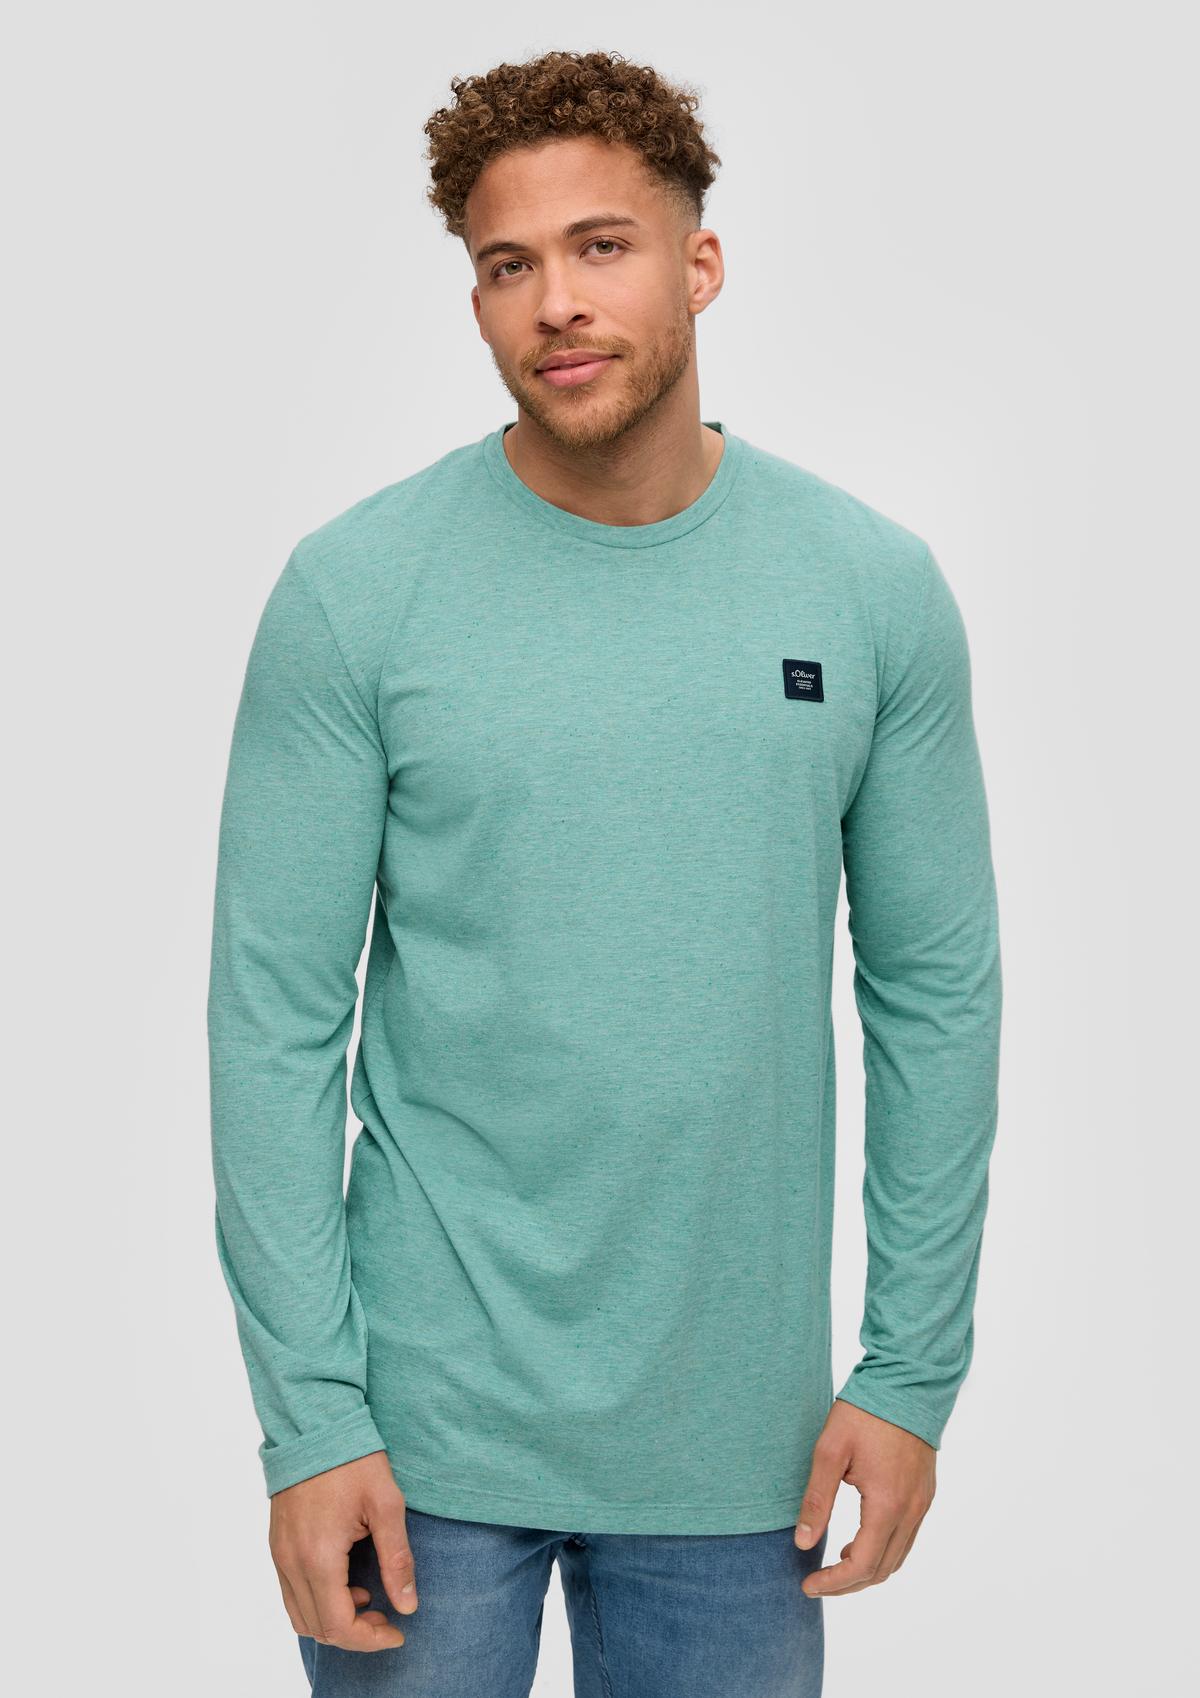 Long sleeve top with a rolled hem - sage green